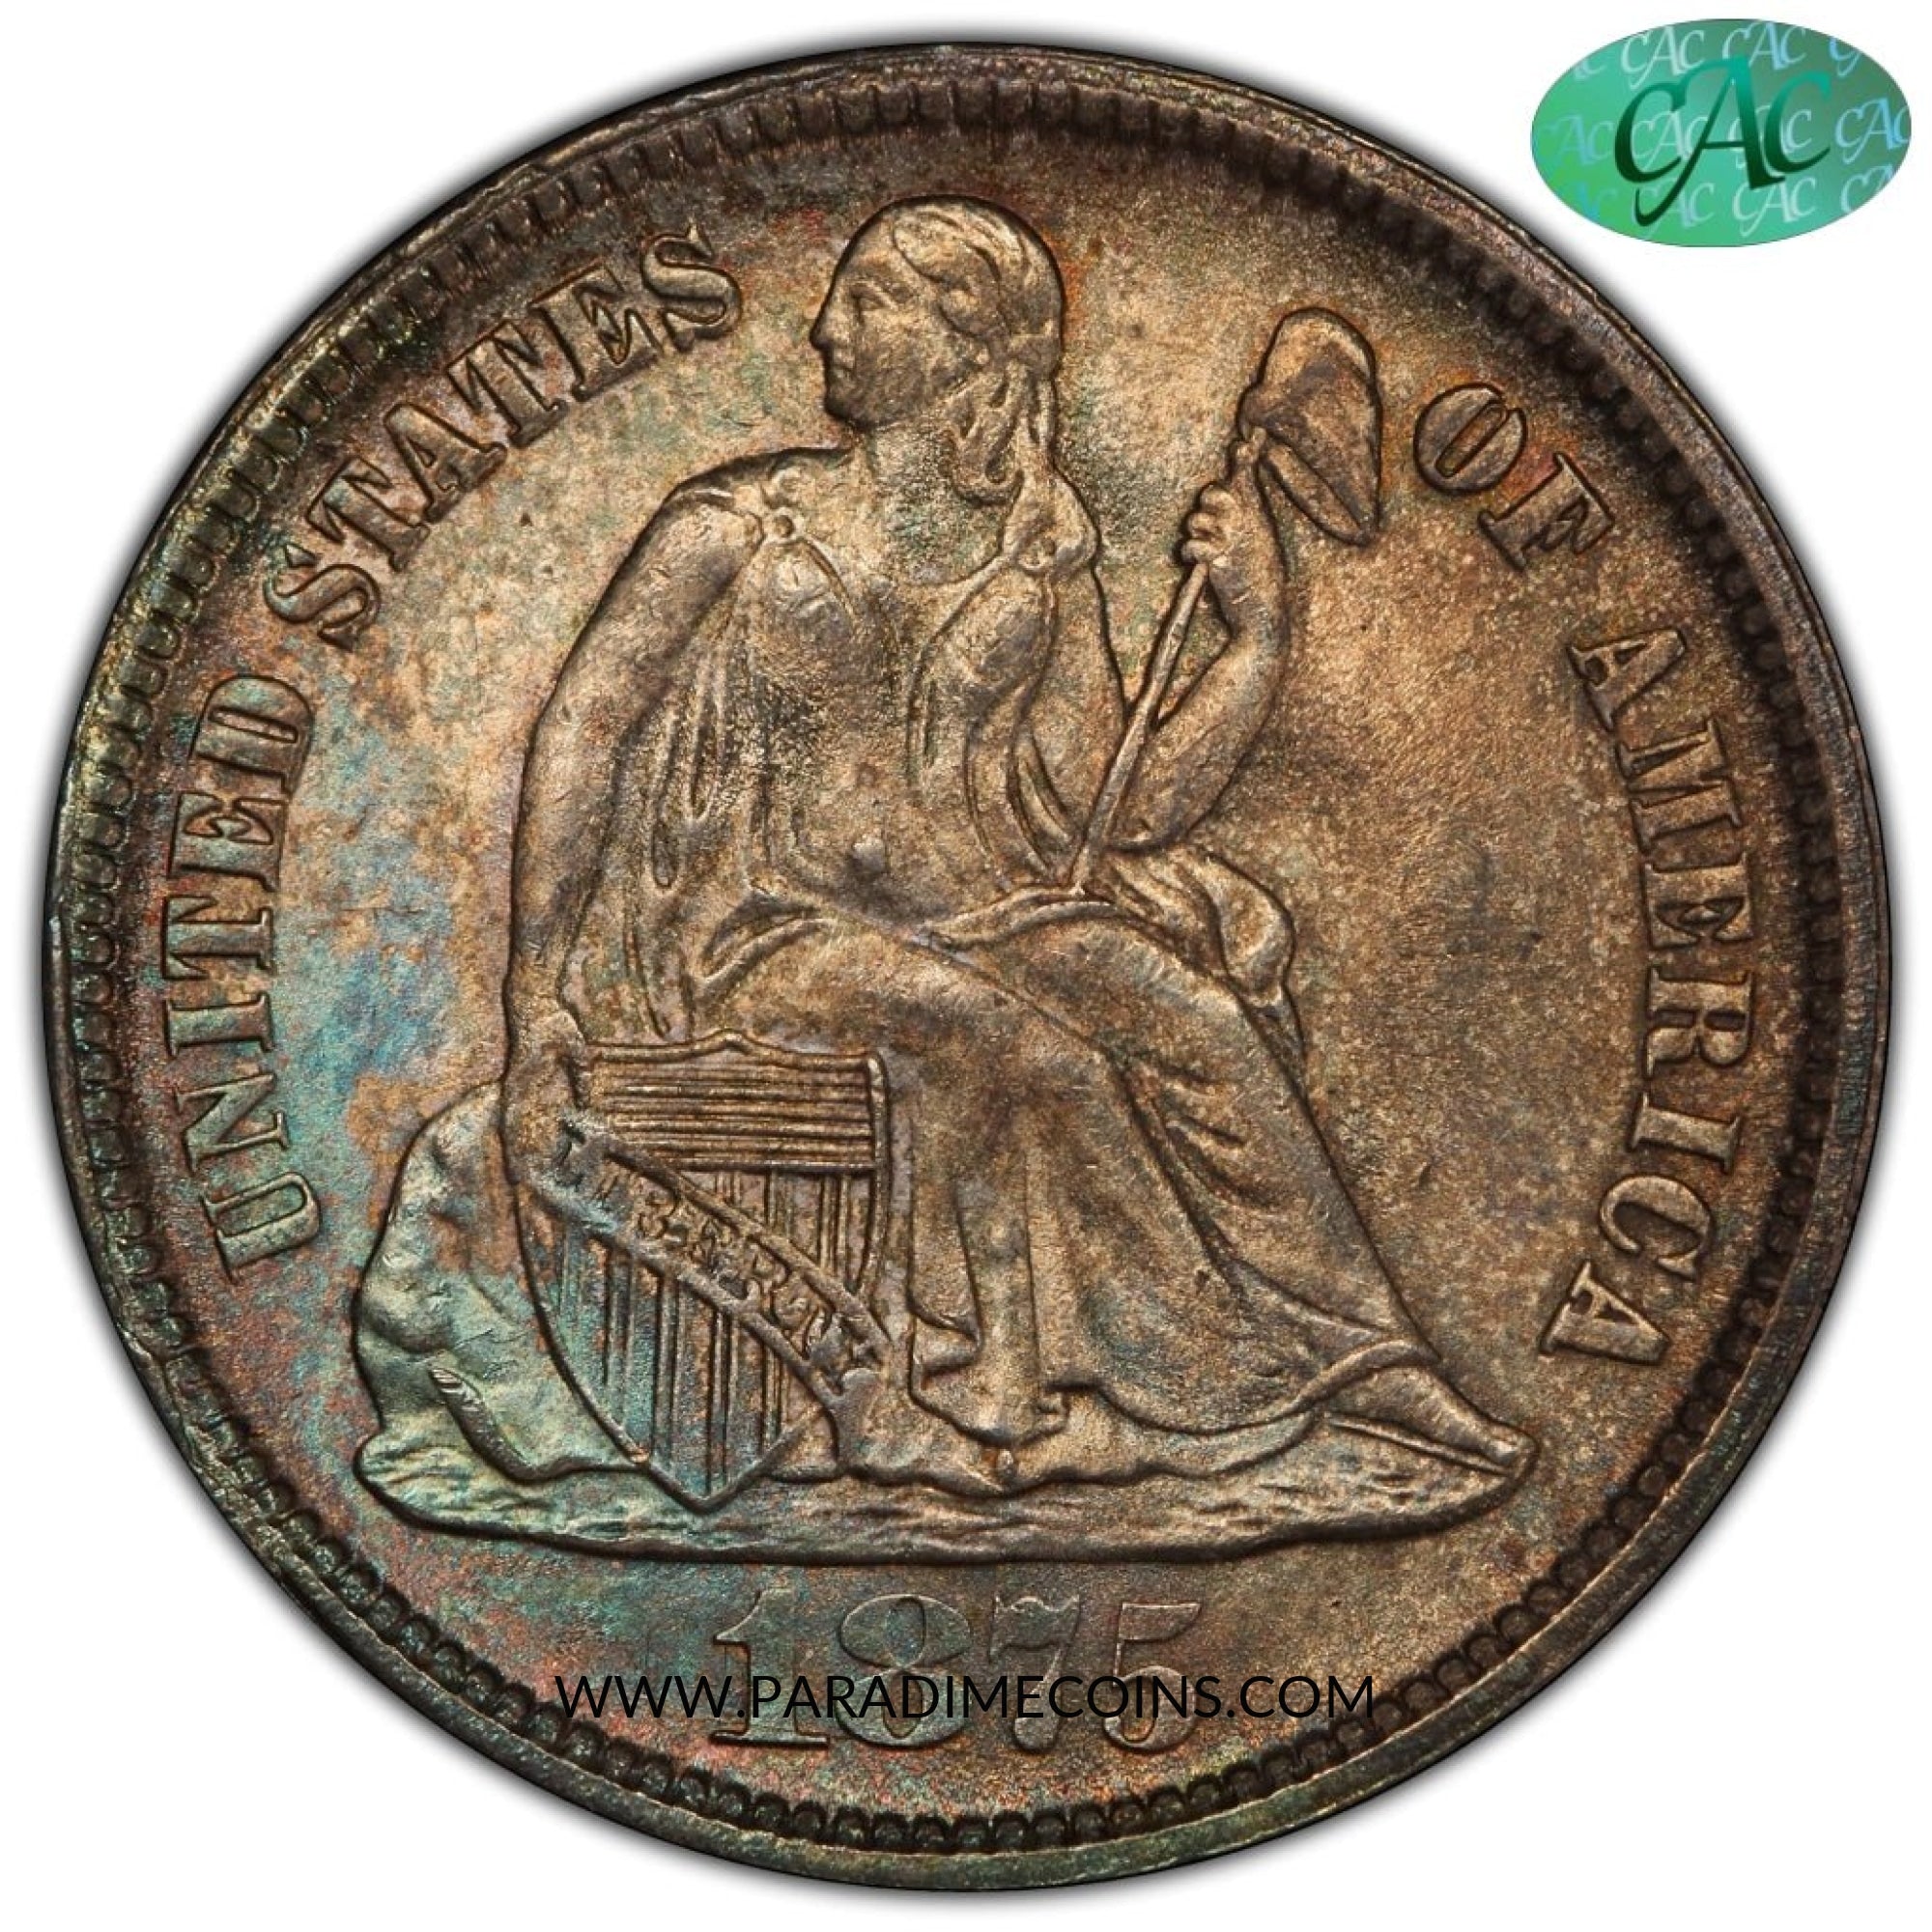 1875-CC 10C MM ABOVE BOW MS65 PCGS CAC - Paradime Coins | PCGS NGC CACG CAC Rare US Numismatic Coins For Sale